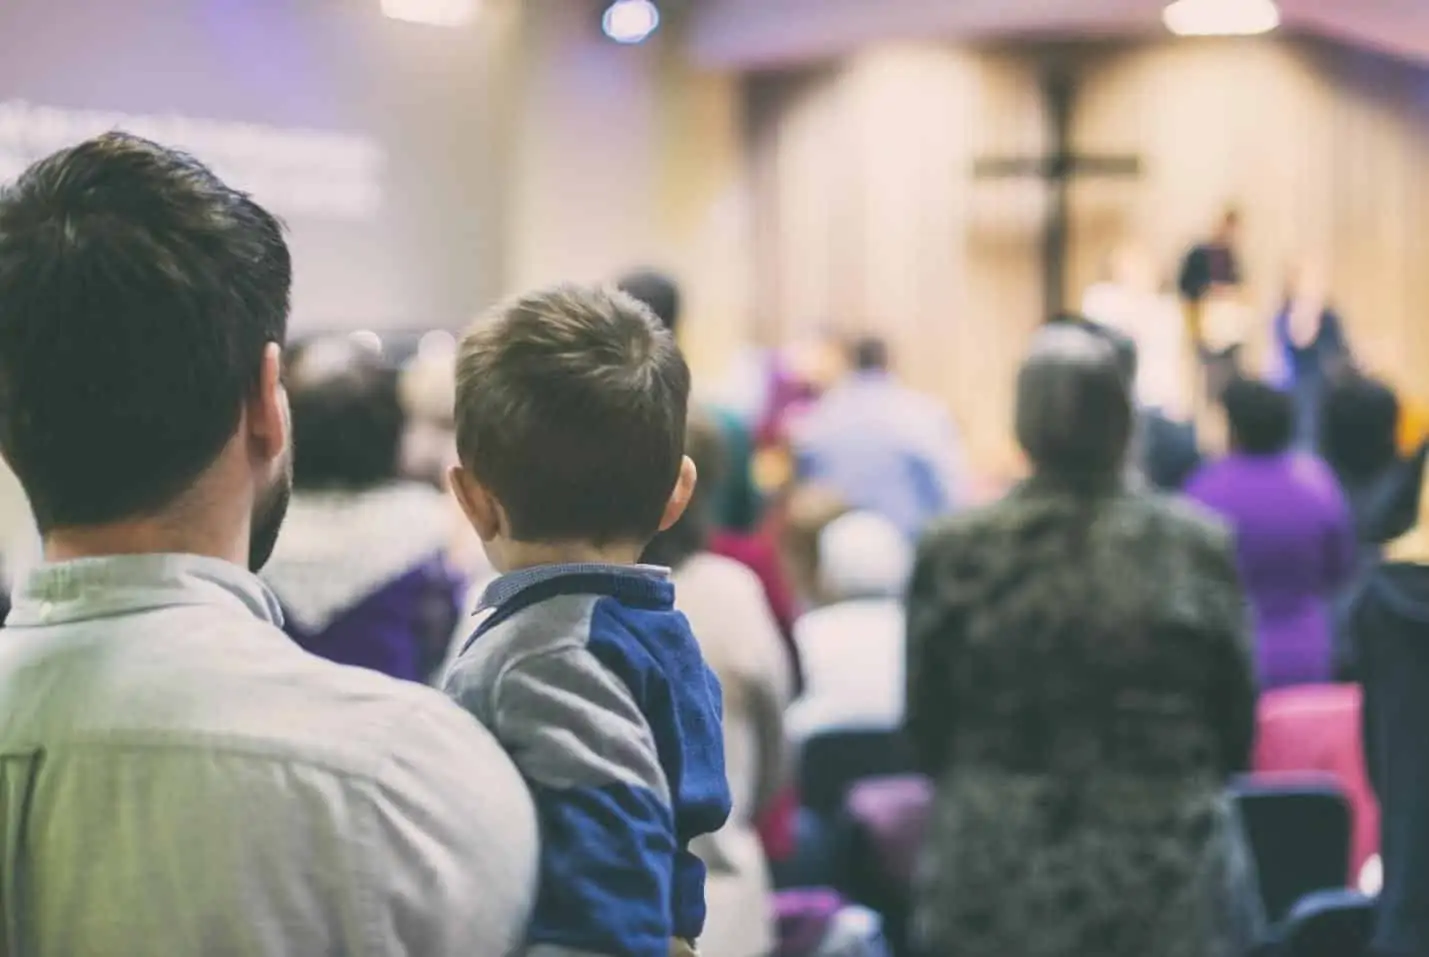 What to Look for When Choosing a New Church for Your Family